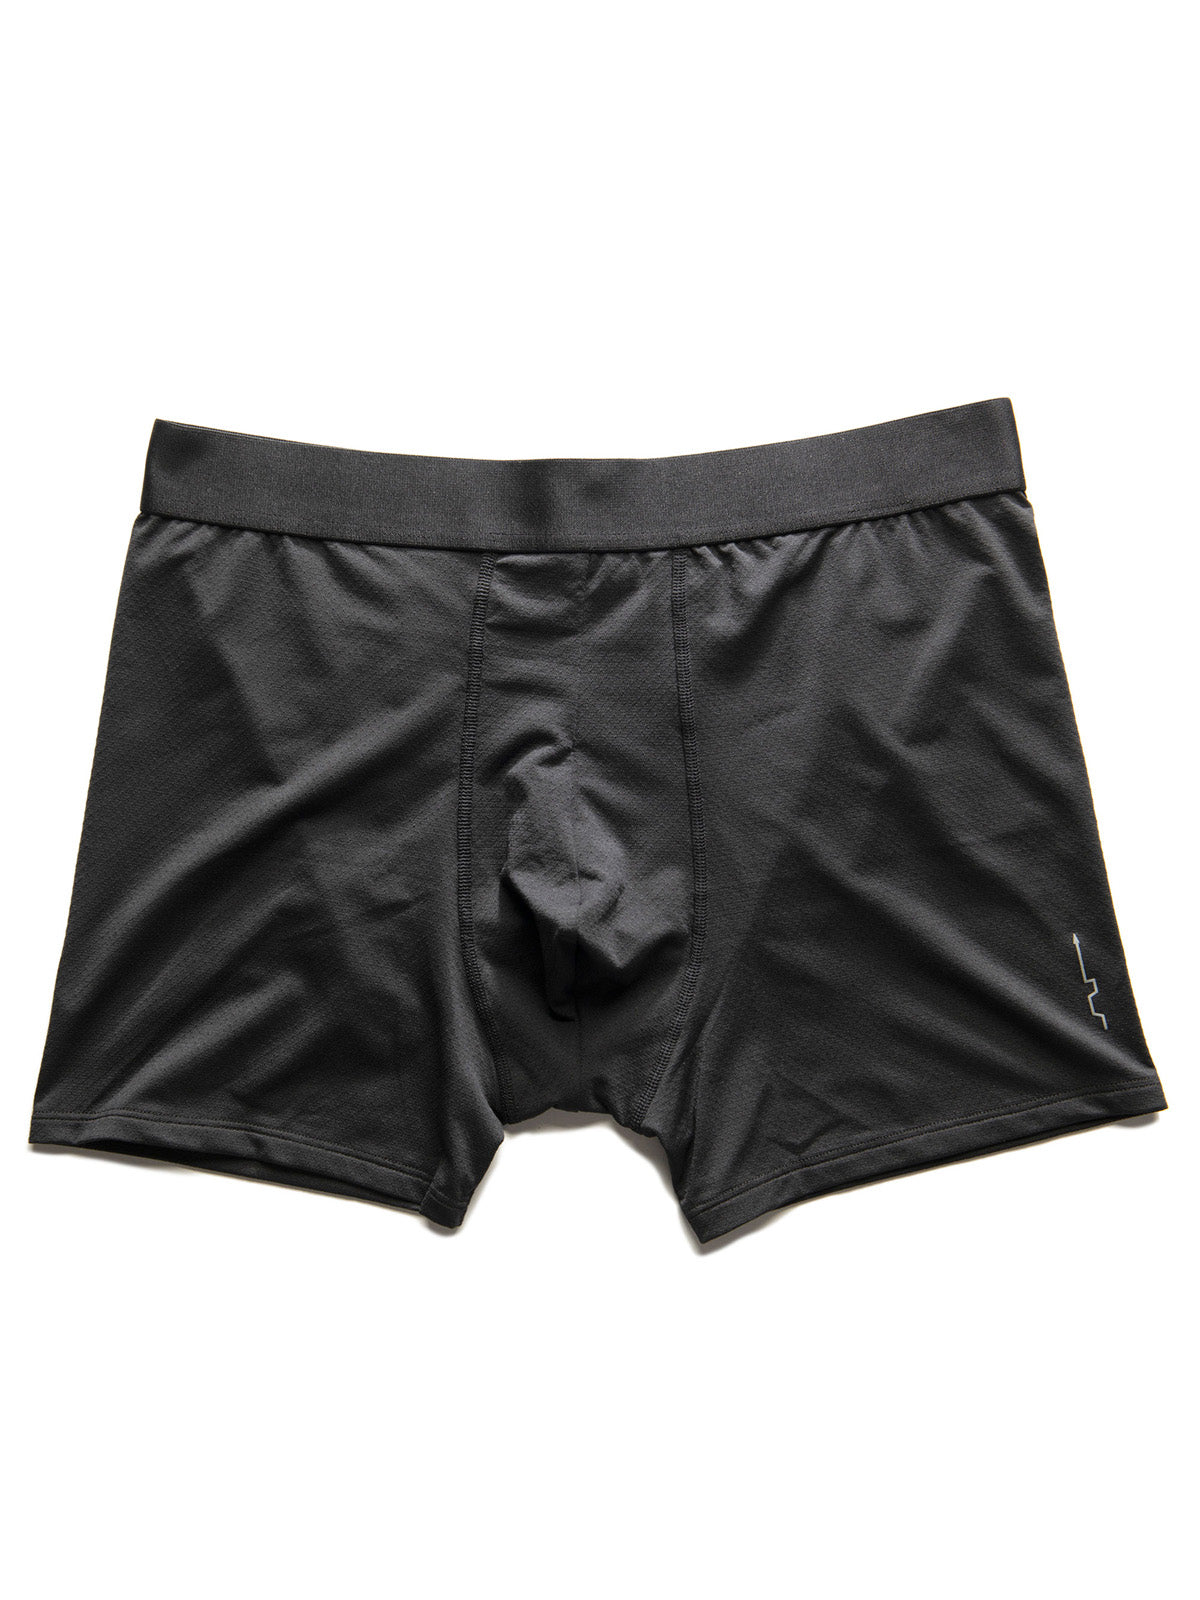 Simple)Gents UNDERWEAR cutting and stitching/front cut 